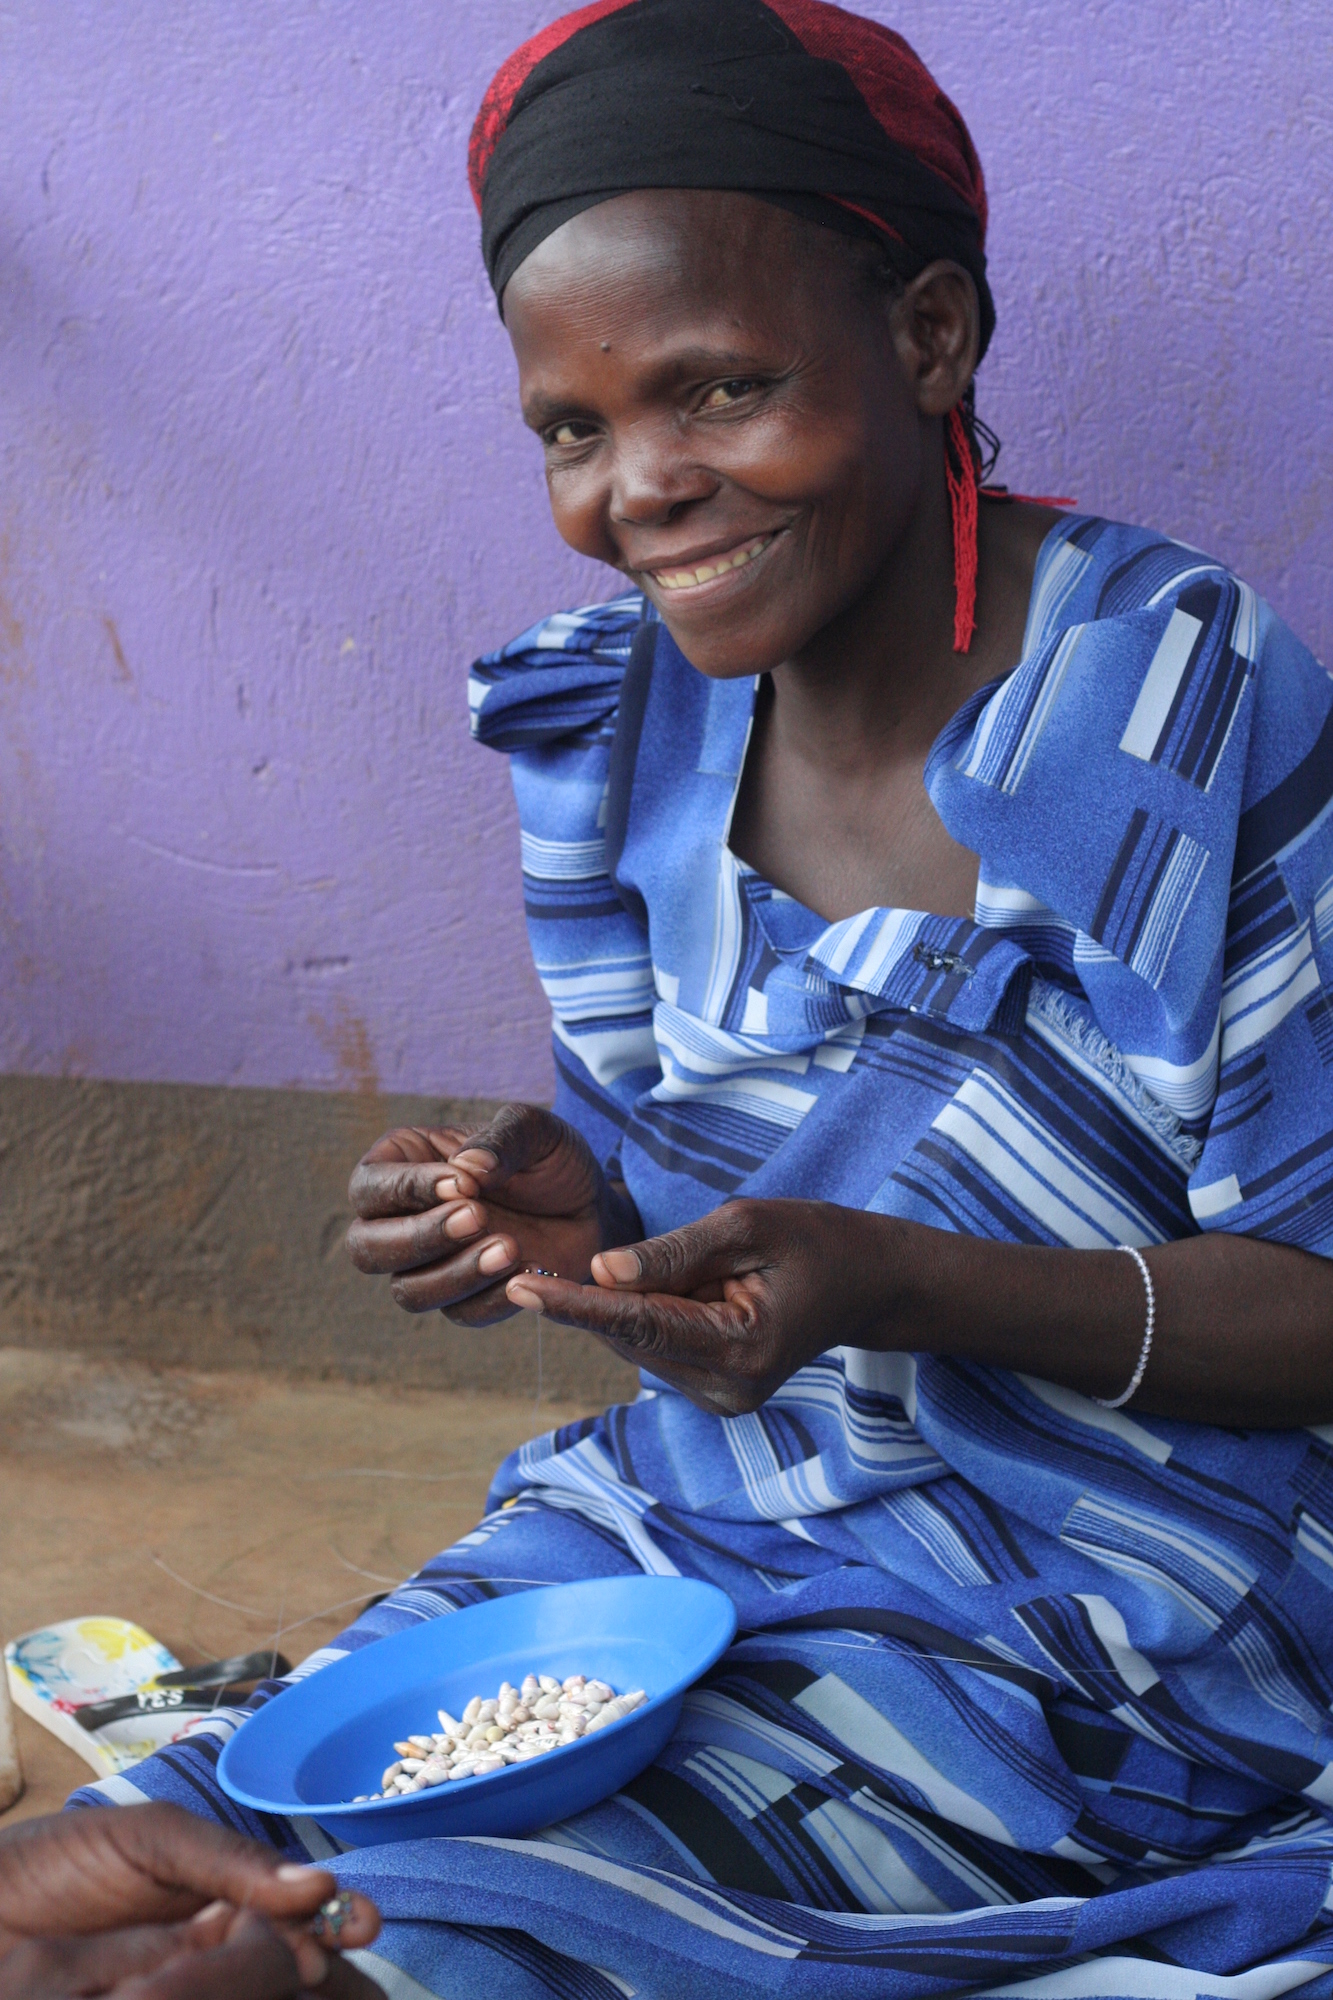 Woman smiling at the camera while stringing beads